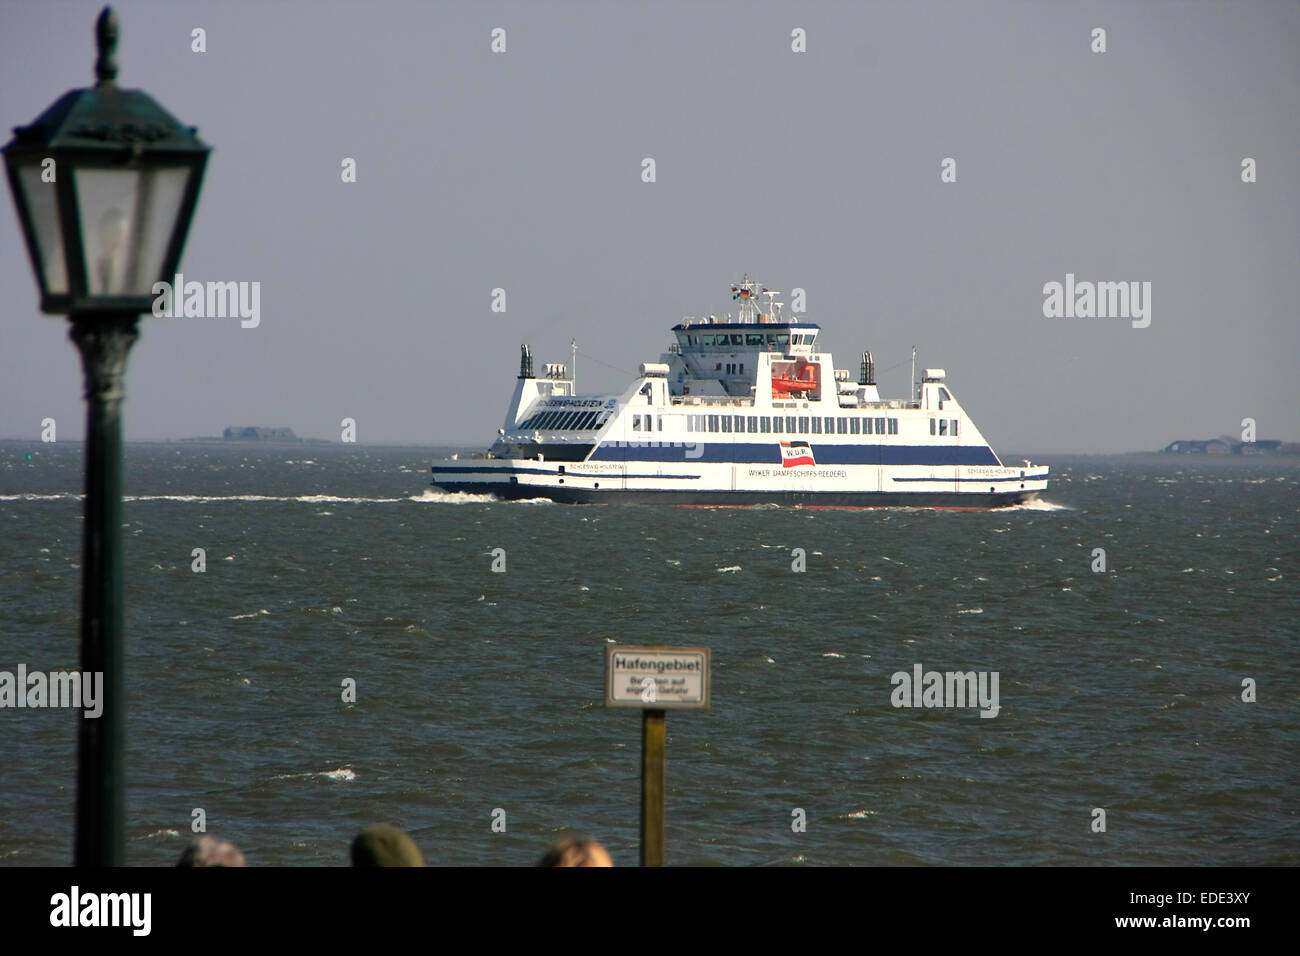 A ferry goes to the islets in the North sea in front Wyk. The promenade of Wyk runs parallel along the beach. Photo: Klaus Nowottnick Date: April 20, 2014 Stock Photo